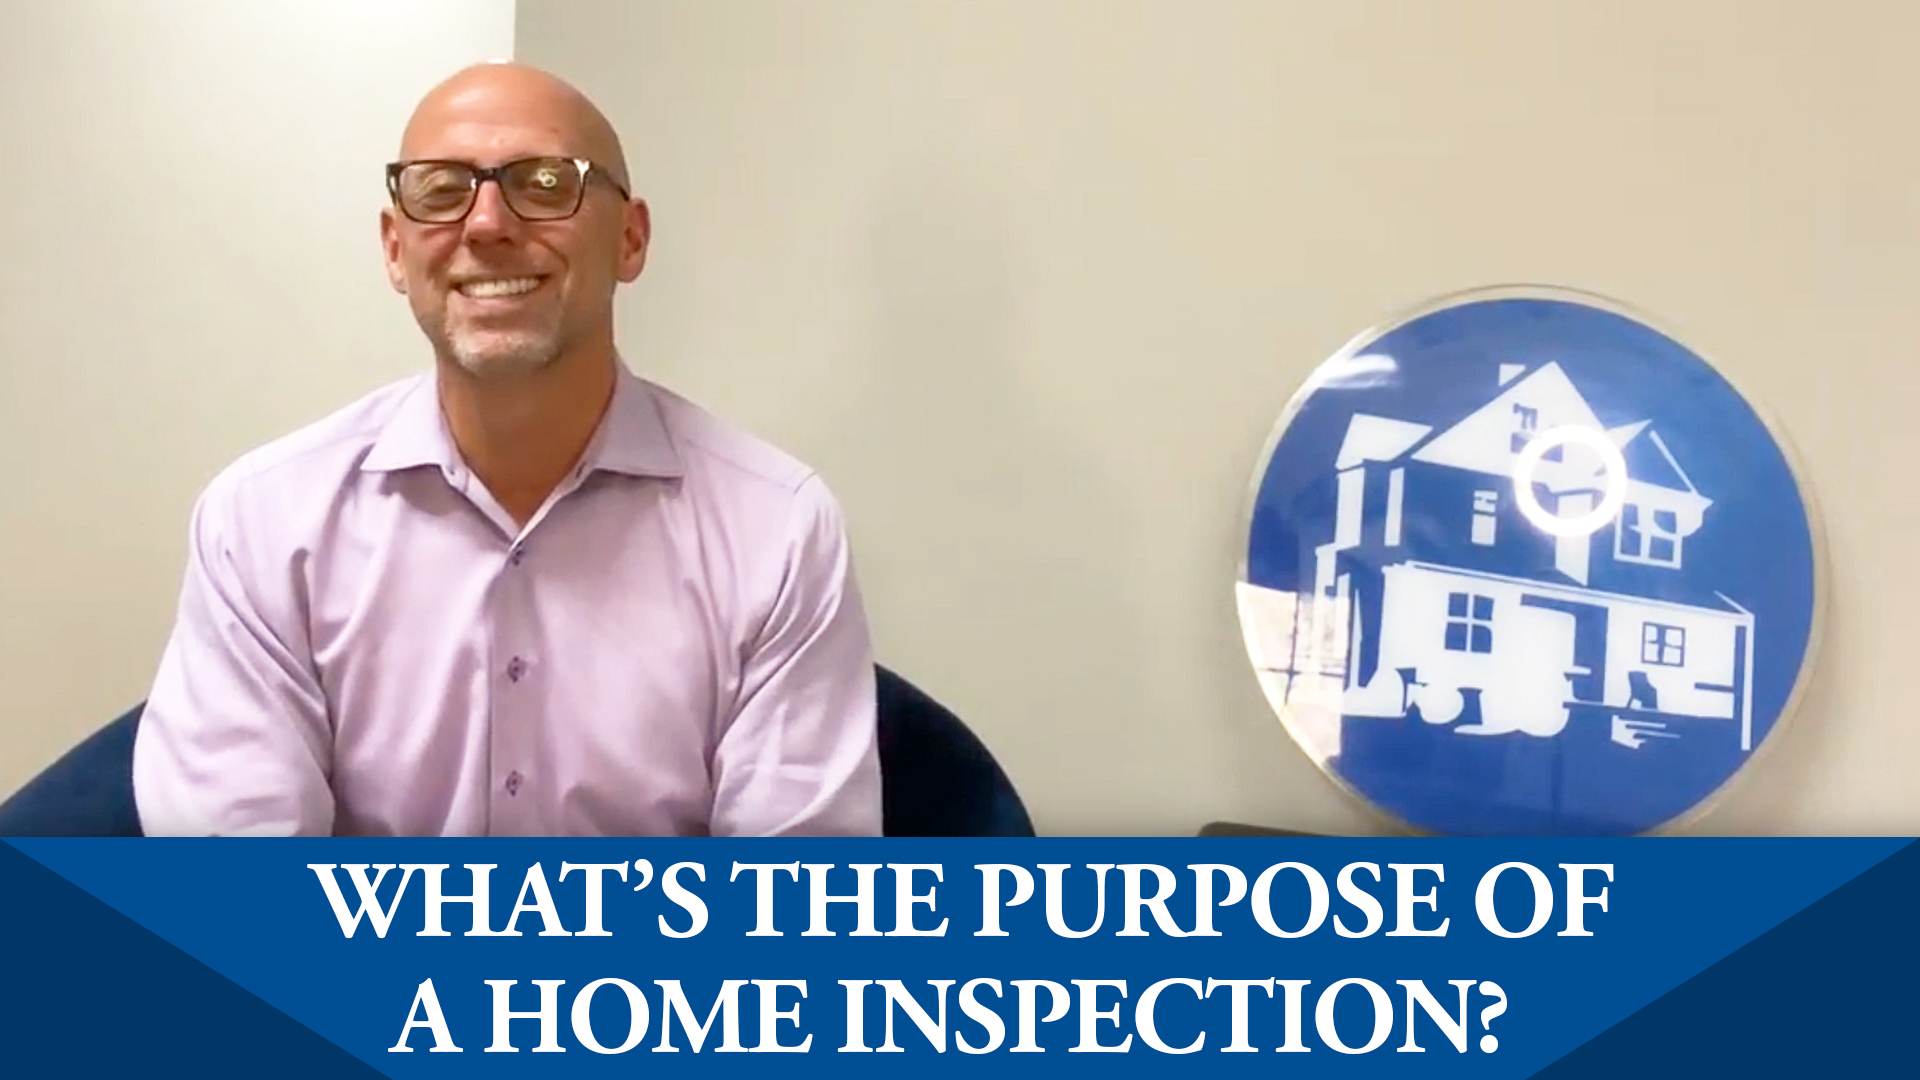 Buyers: How Should You Handle Home Inspections?